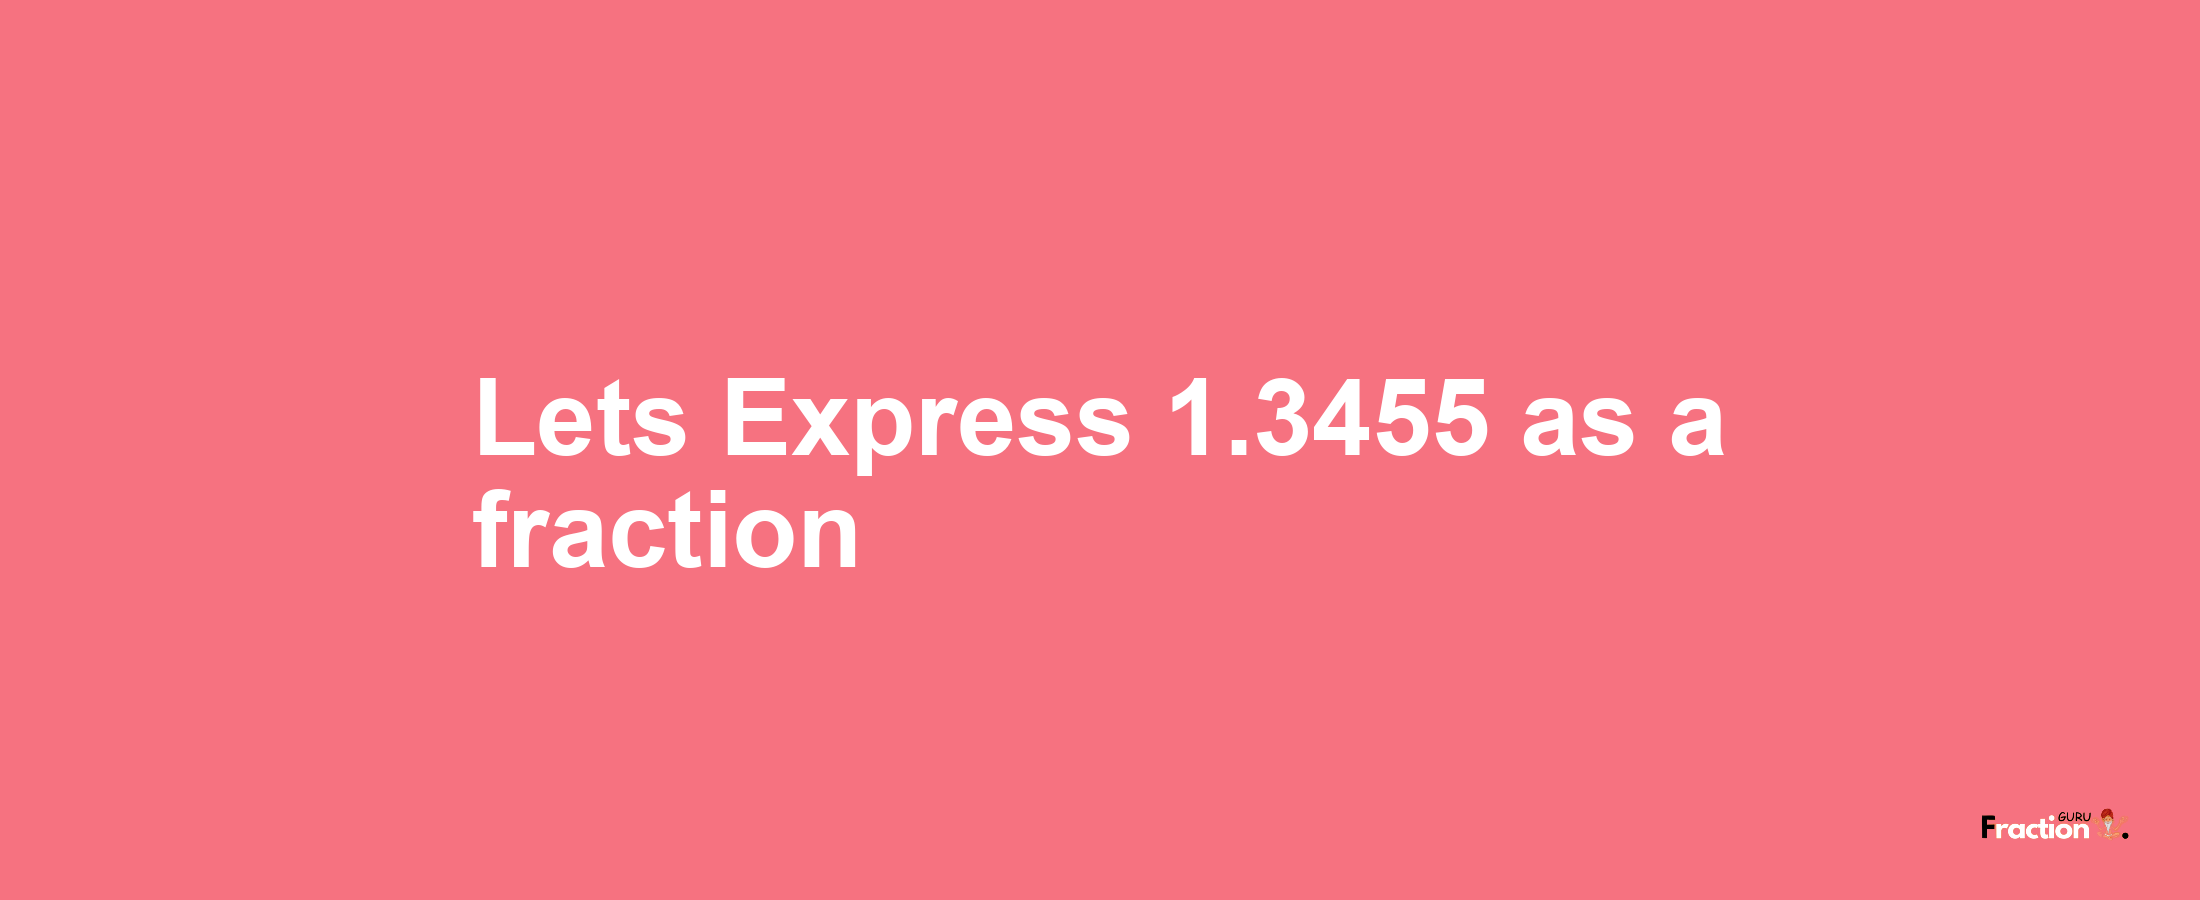 Lets Express 1.3455 as afraction